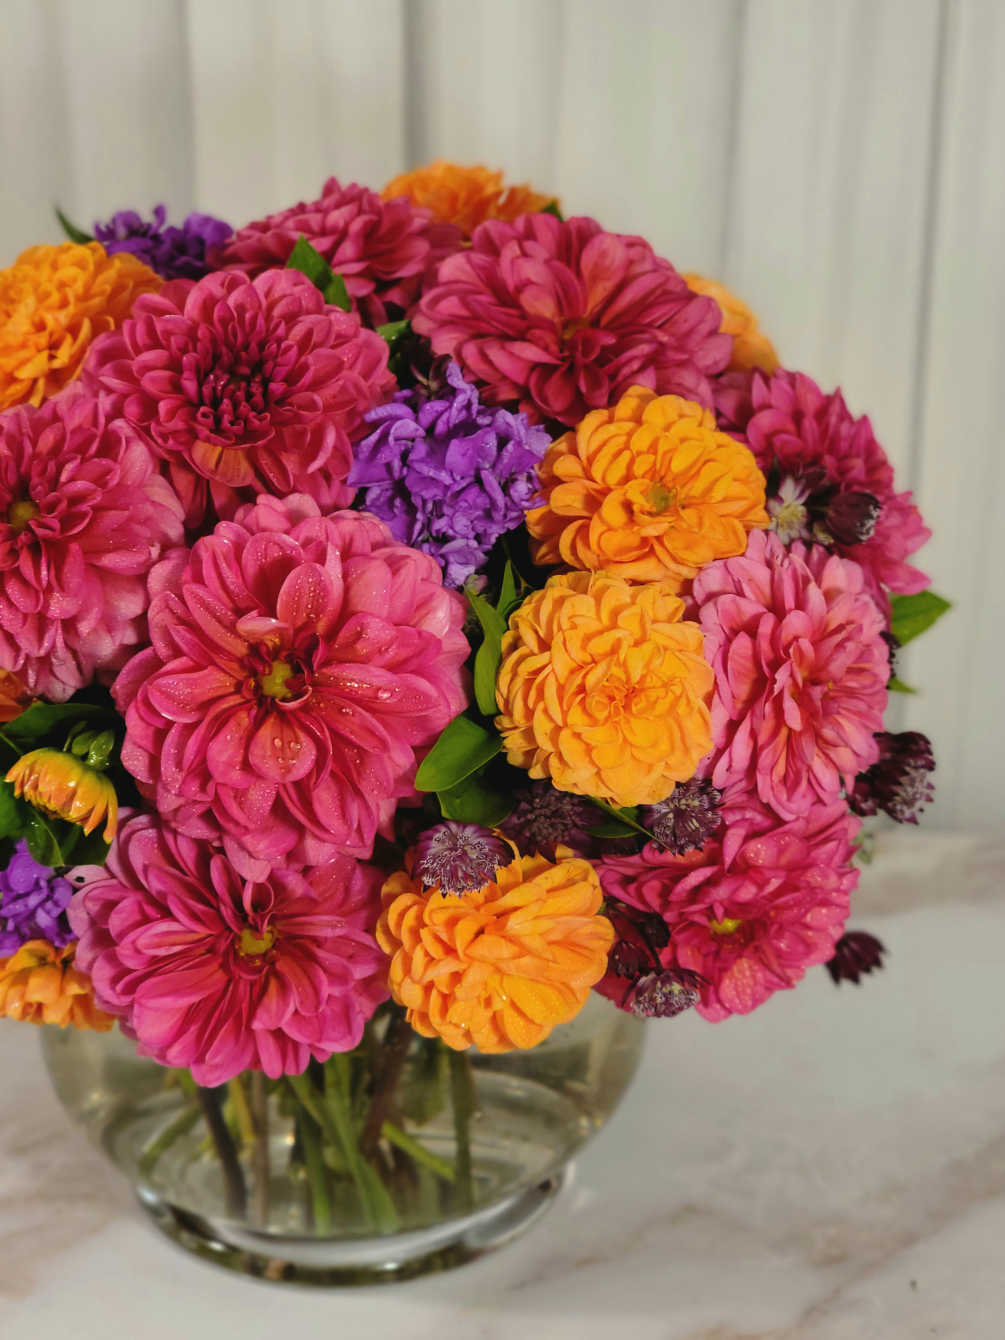 The composition made up of dahlias will definitely appeal to connoisseurs of